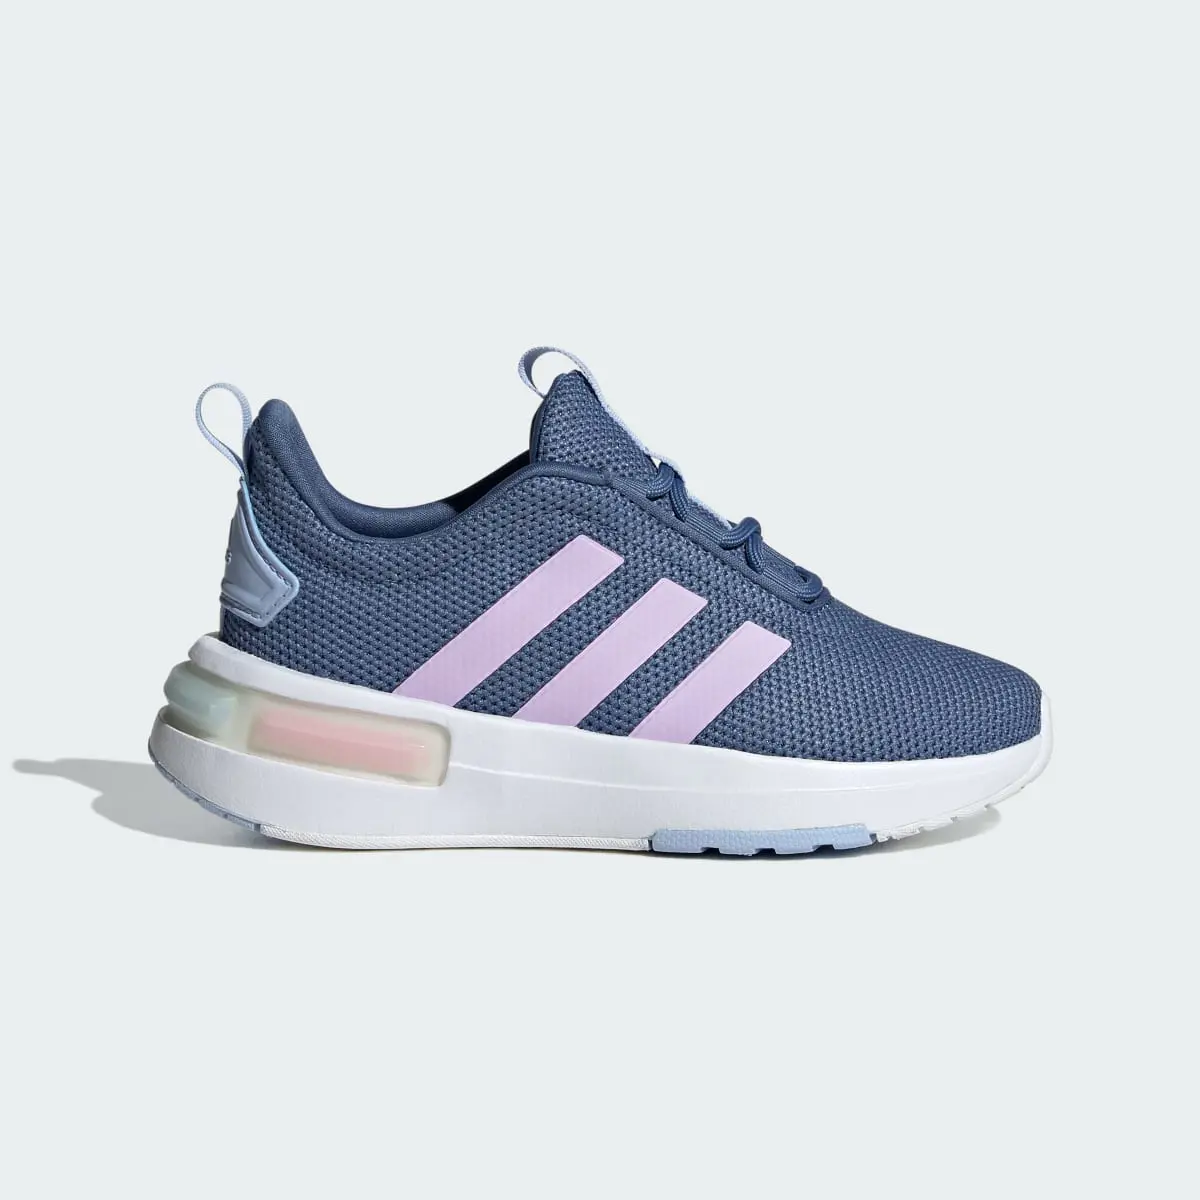 Adidas Racer TR23 Wide Shoes Kids. 2